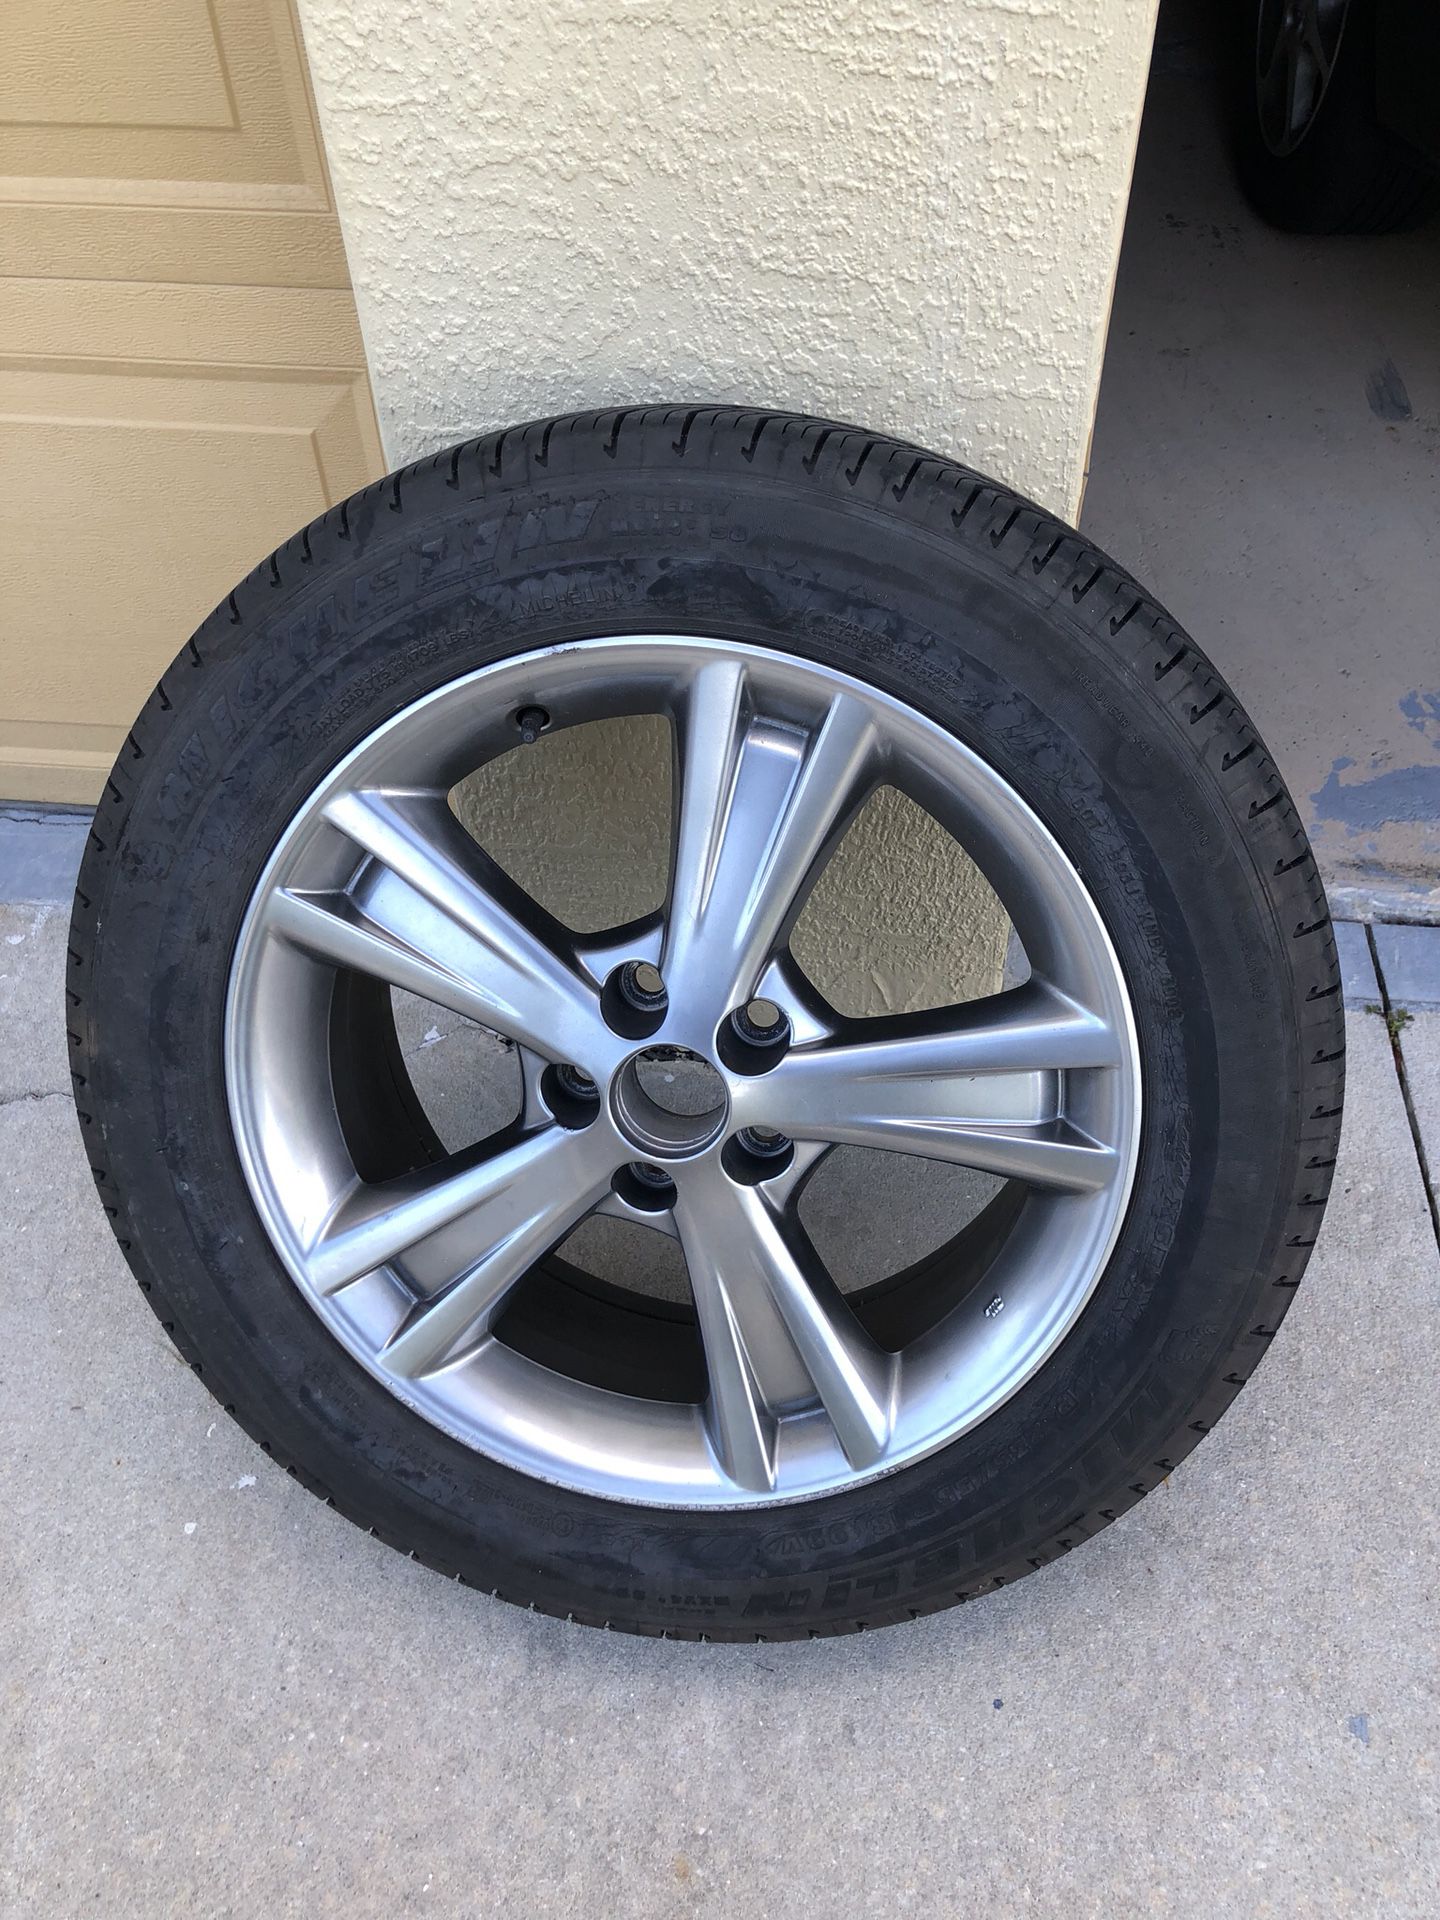 One Lexus RX rim and tire